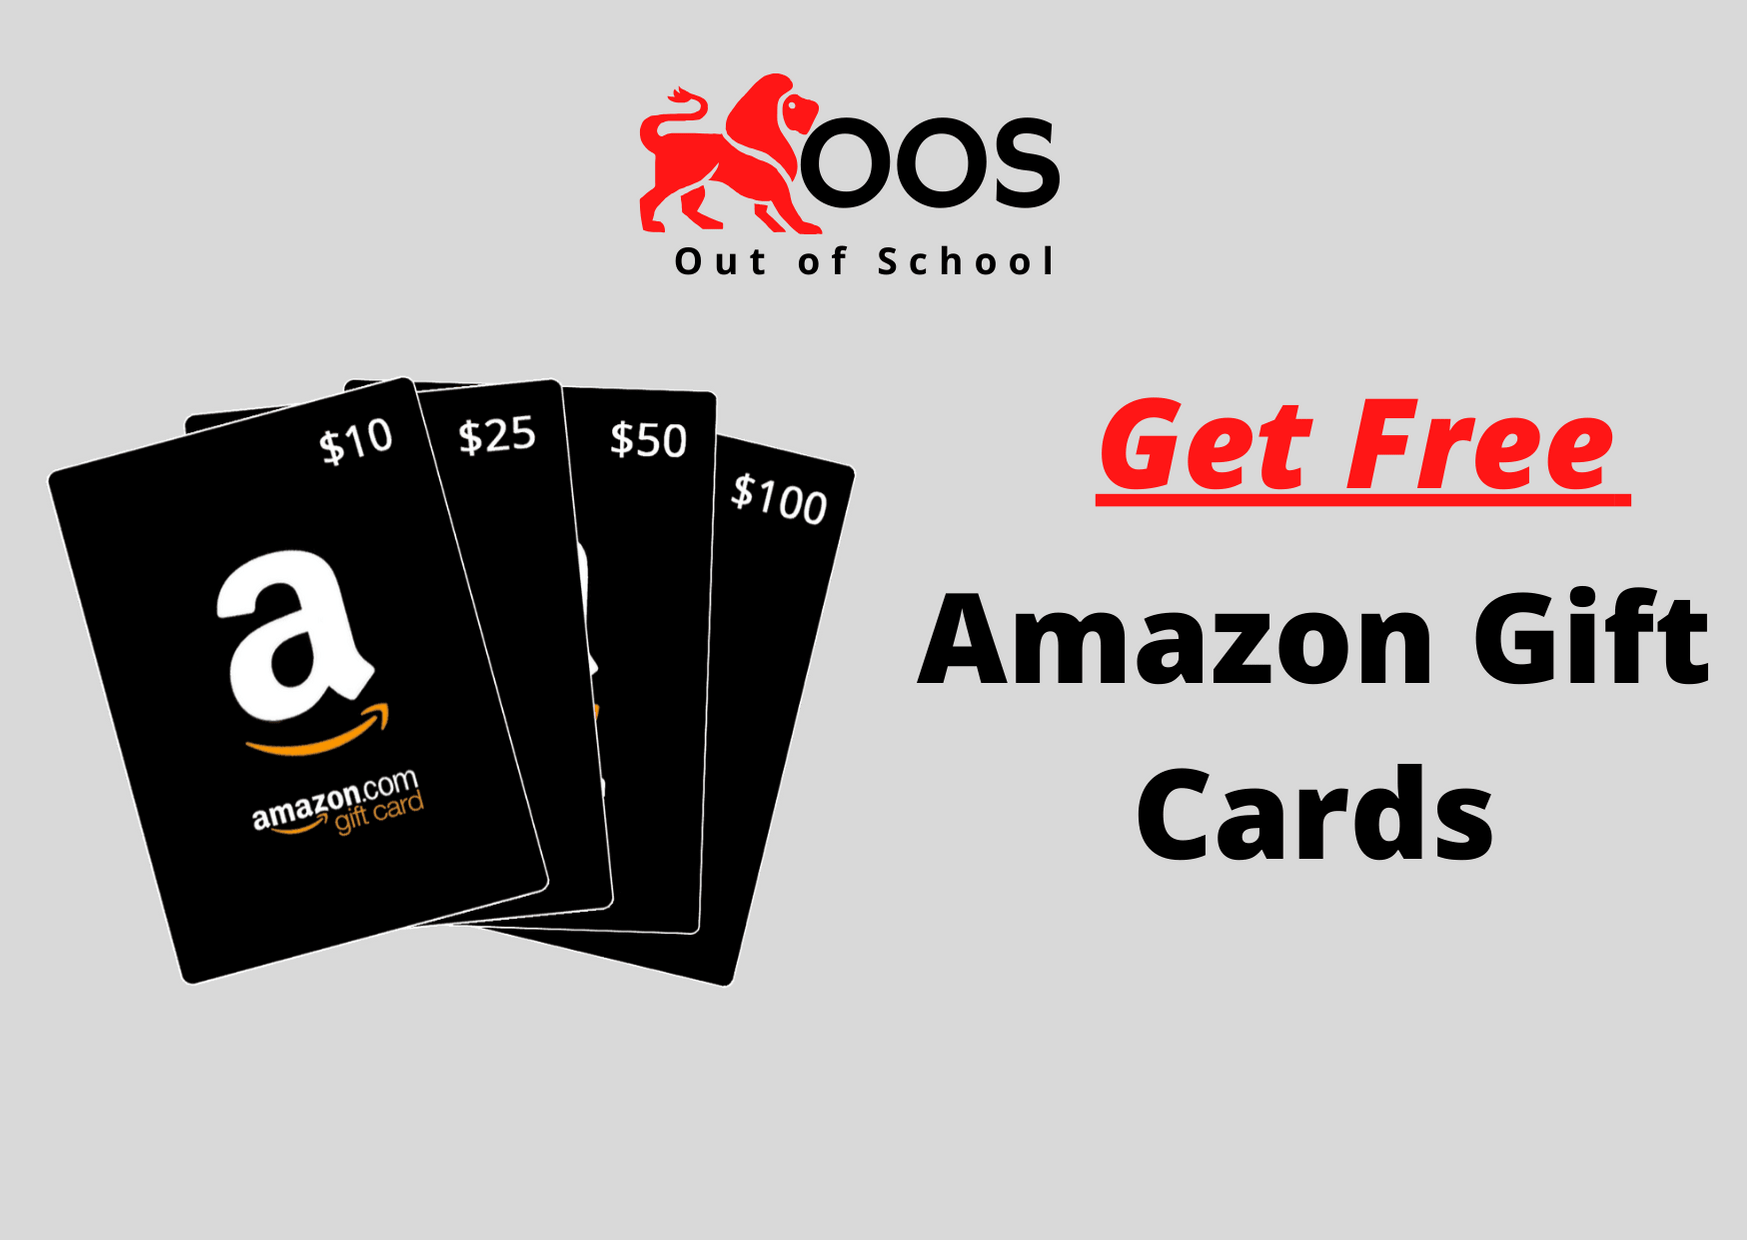 Free Amazon Gift Cards 2020 August How to Get?